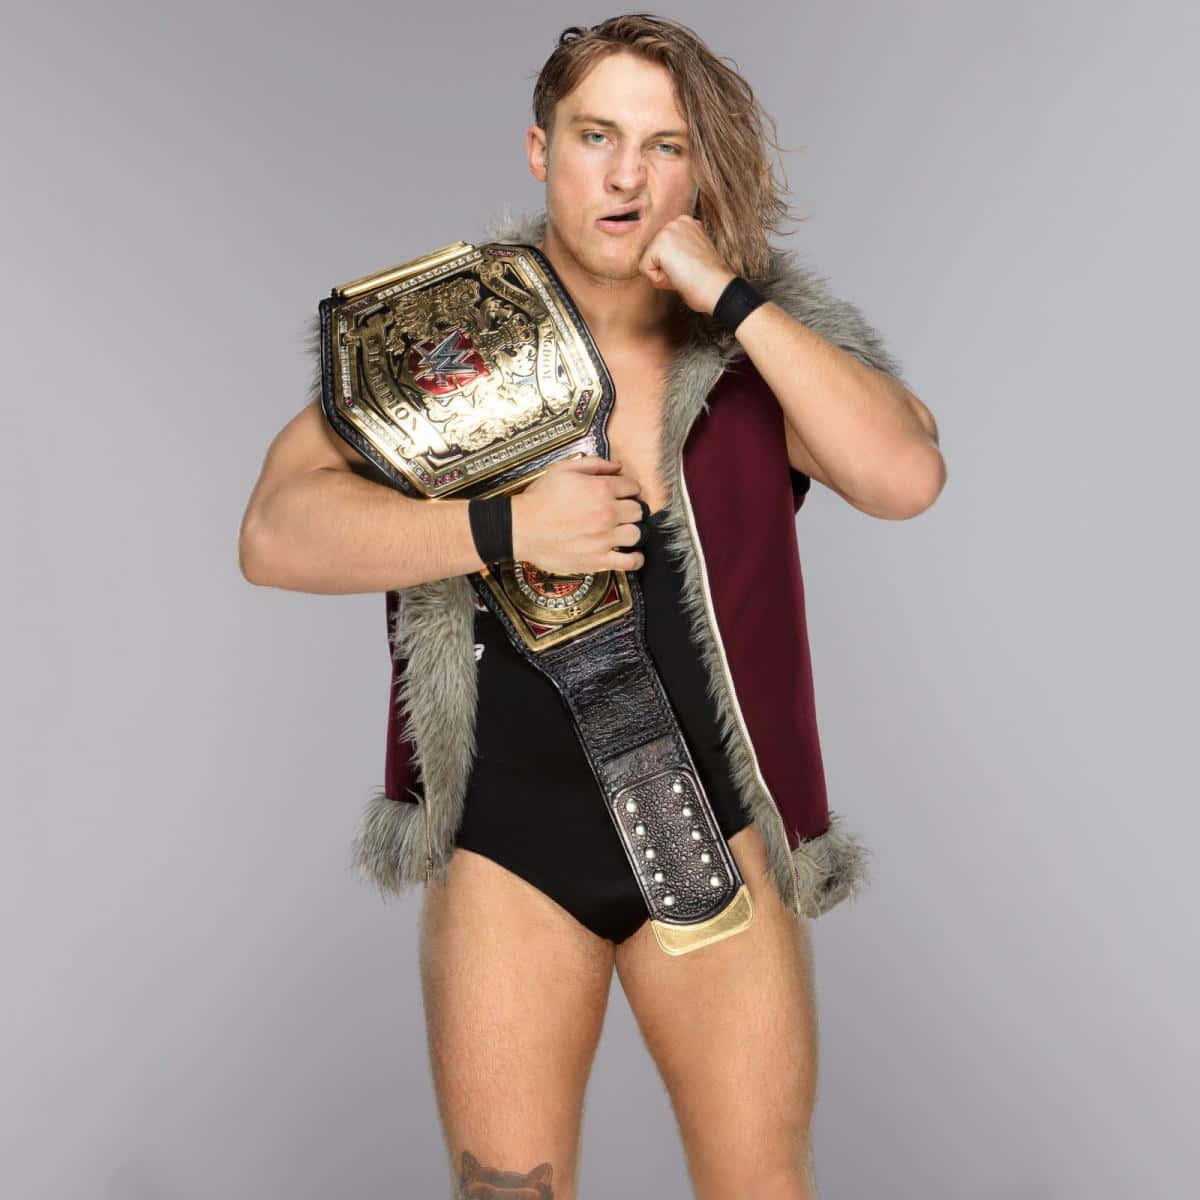 Pete Dunne First Portrait As Champion Background